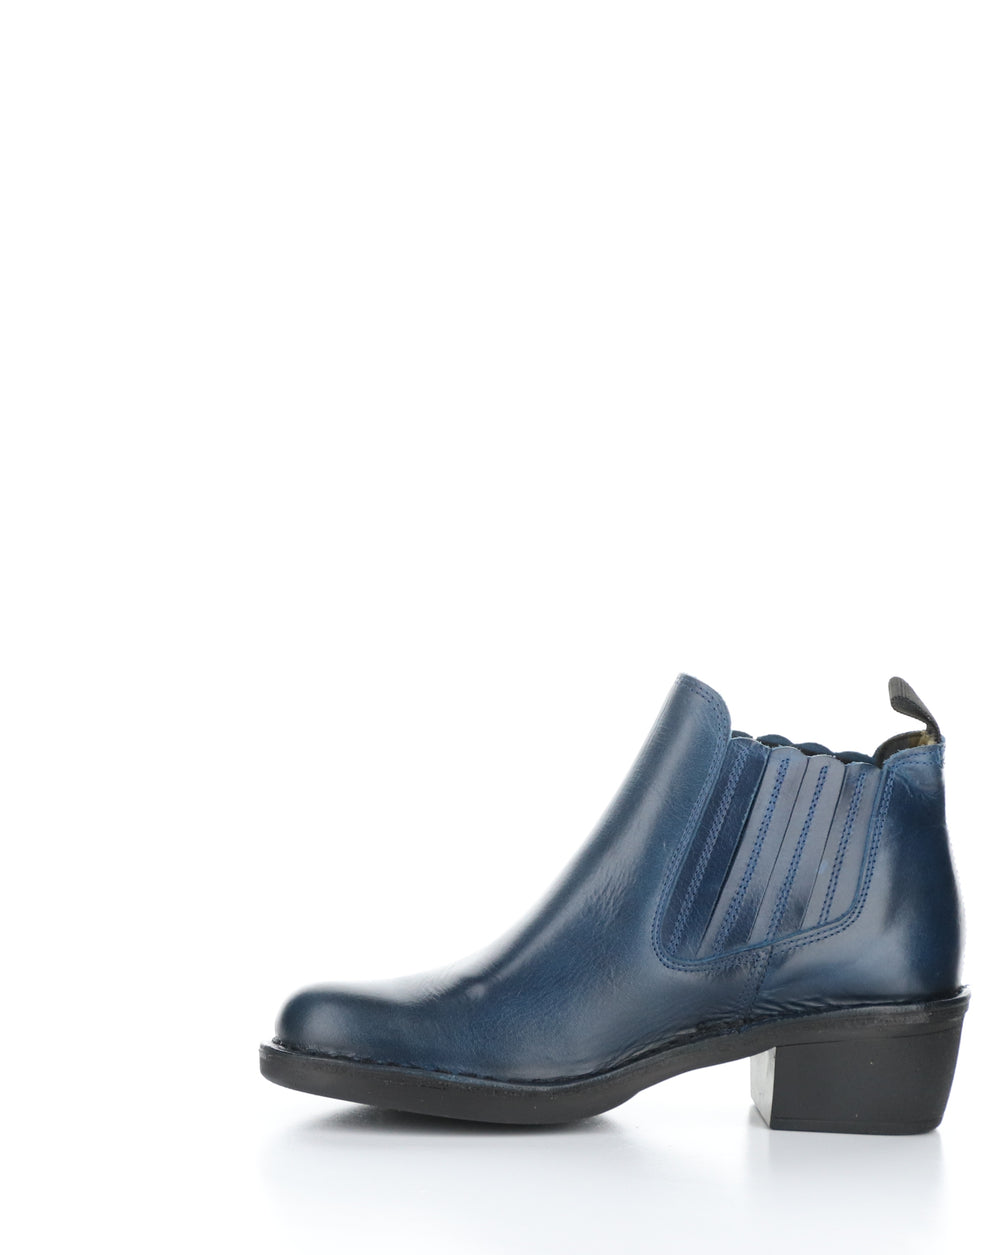 MOOF103FLY 005 ROYAL BLUE Round Toe Boots